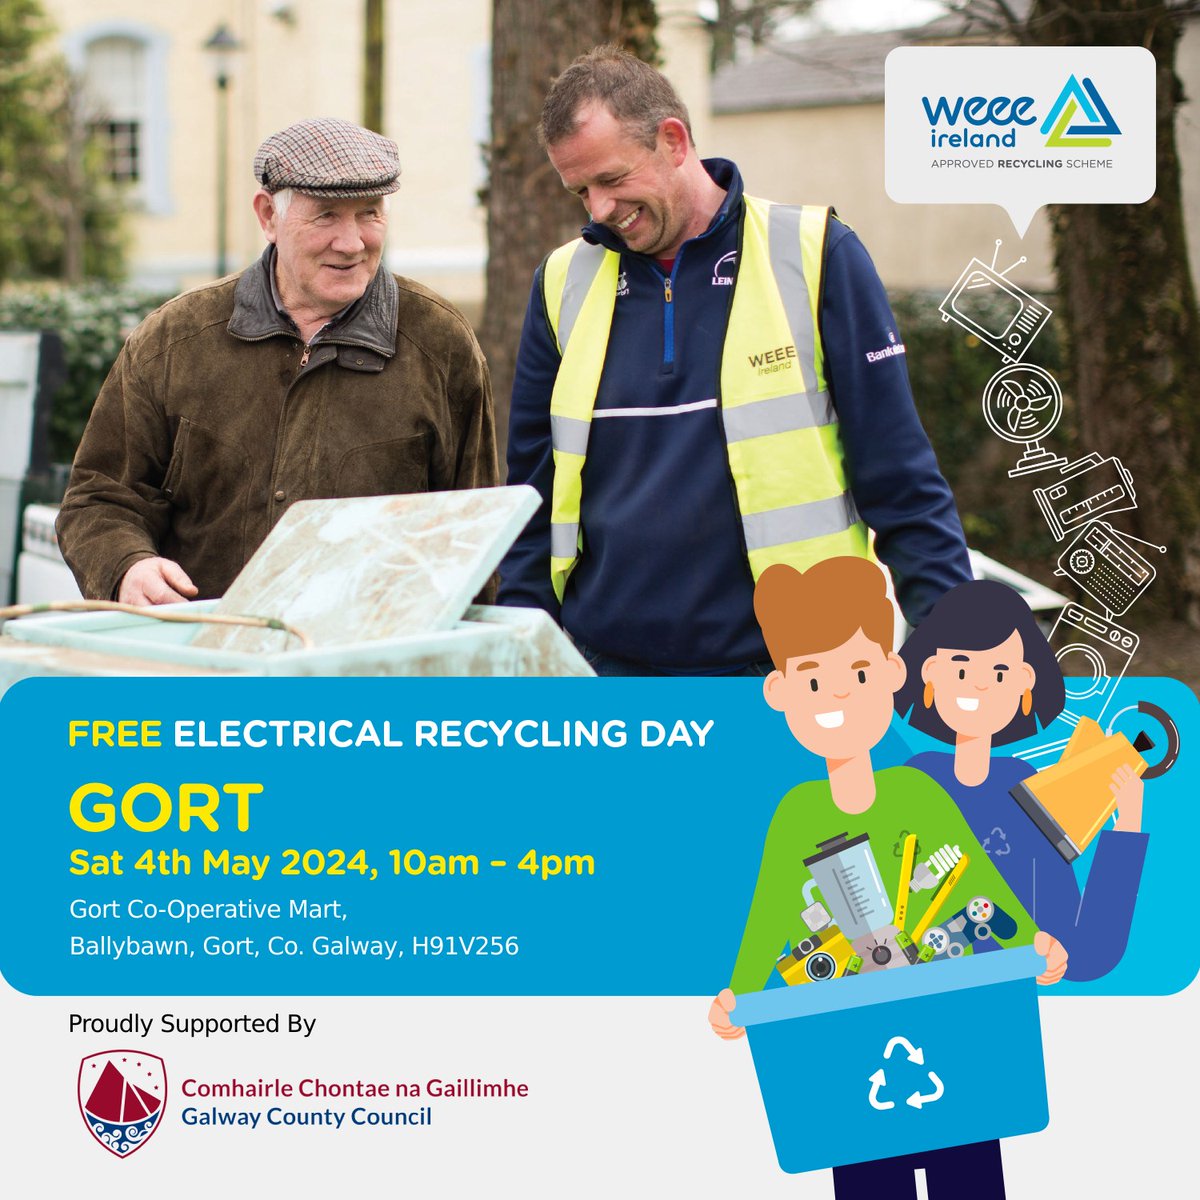 WEEE Collection - Gort
📅 10am - 4pm Saturday 4th May 2024
📍    Gort Co-Operative Mart, Ballybawn, Gort, Co. Galway
#YourCouncil #Galway #Gaillimh